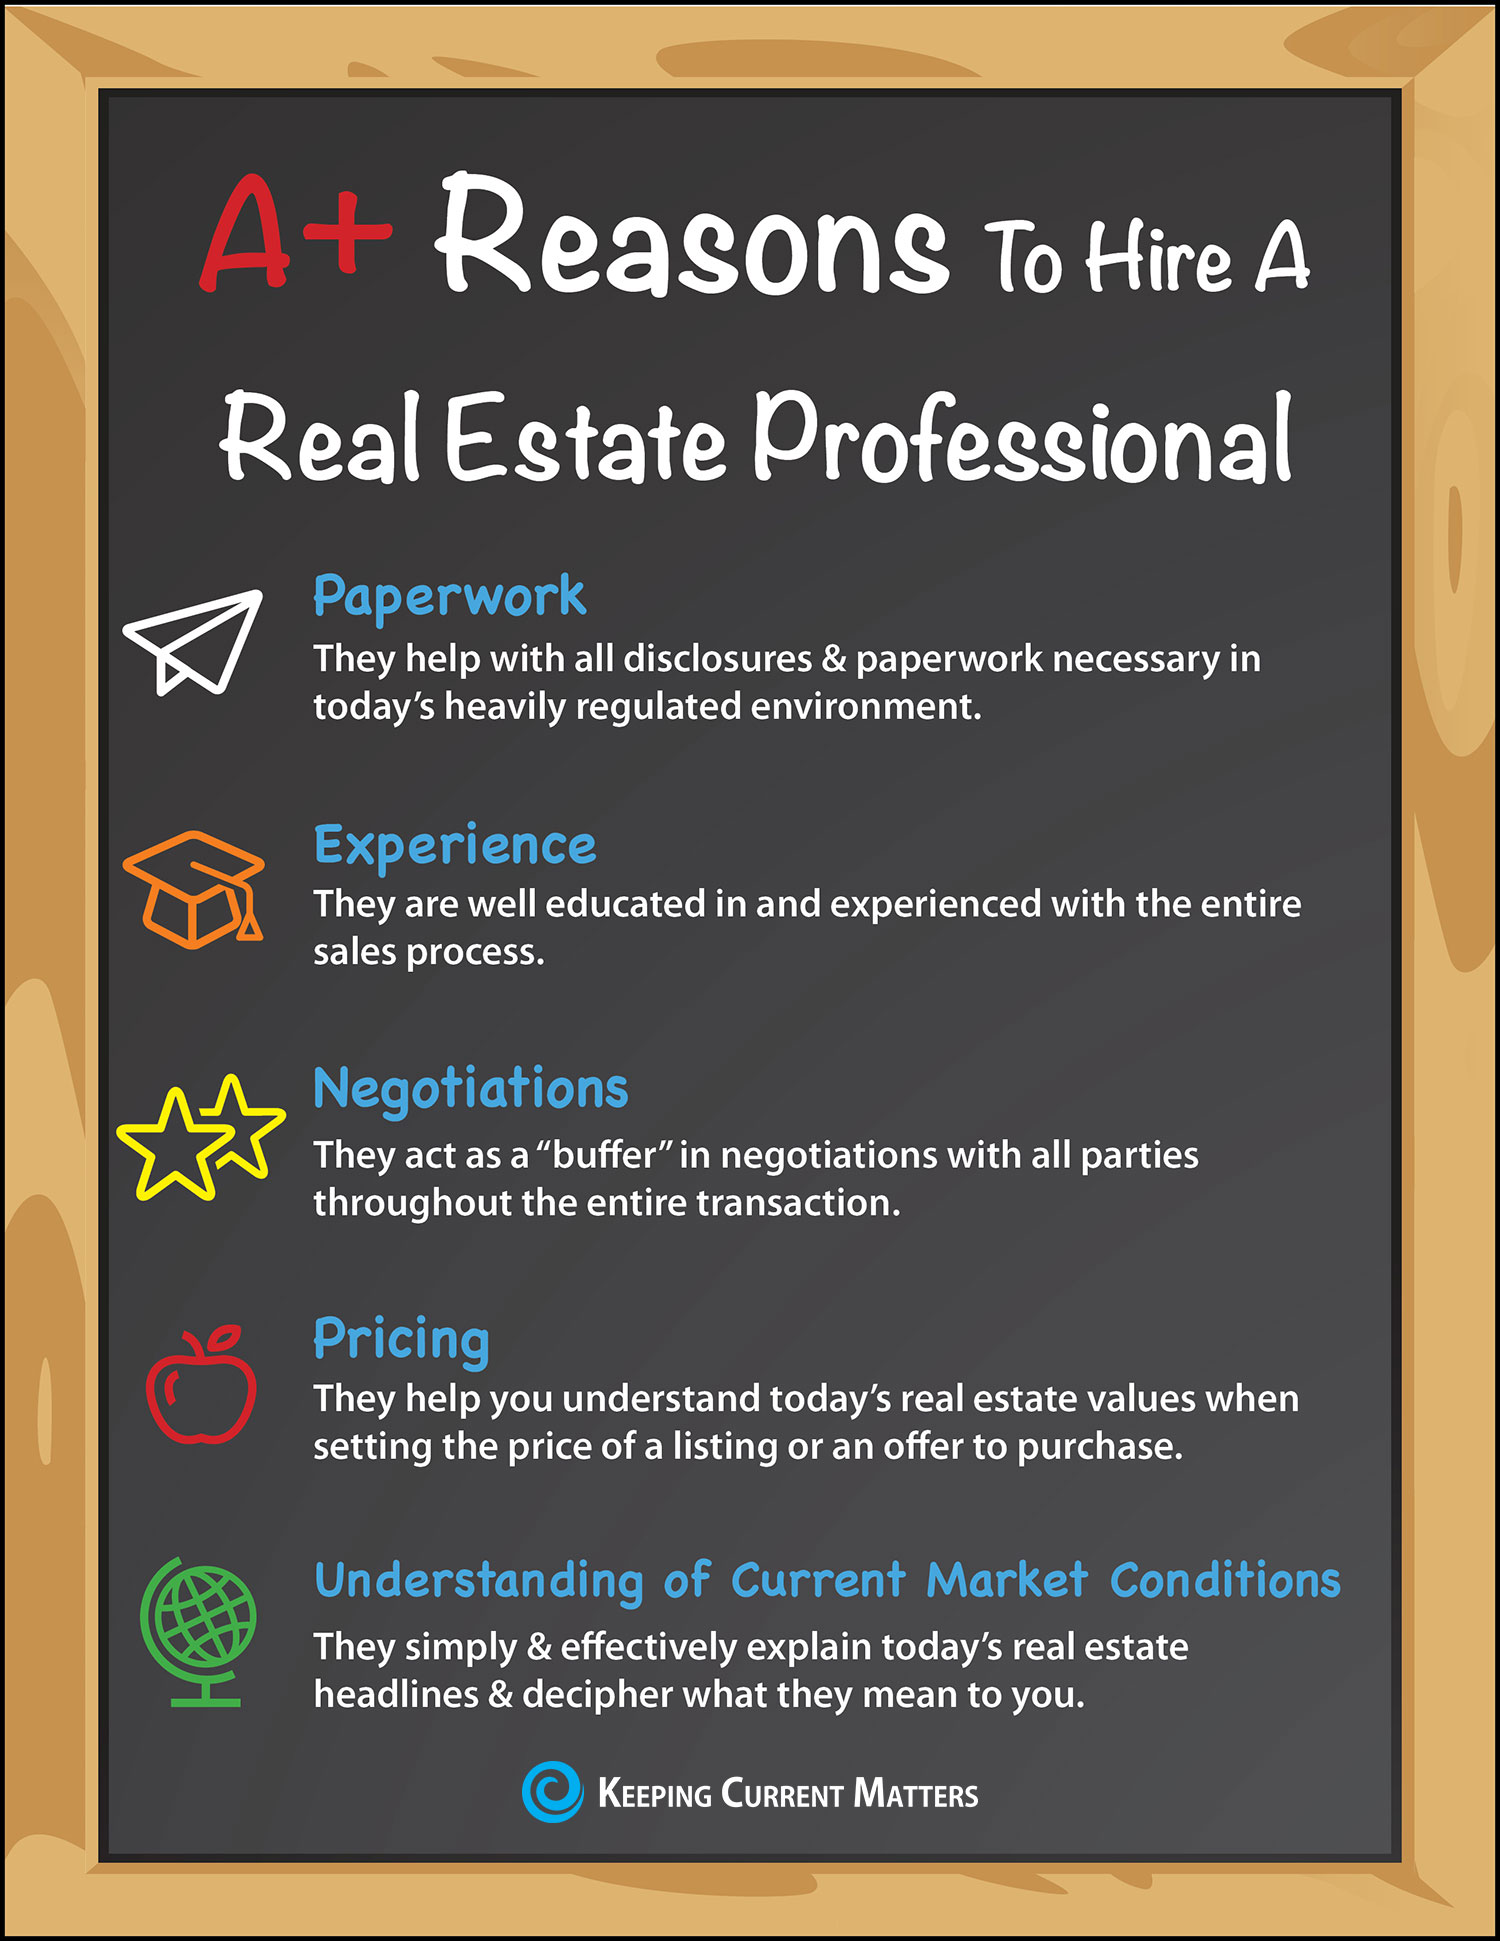 Top 5 A+ Reasons to Hire a Real Estate Pro [INFOGRAPHIC] | Keeping Current Matters